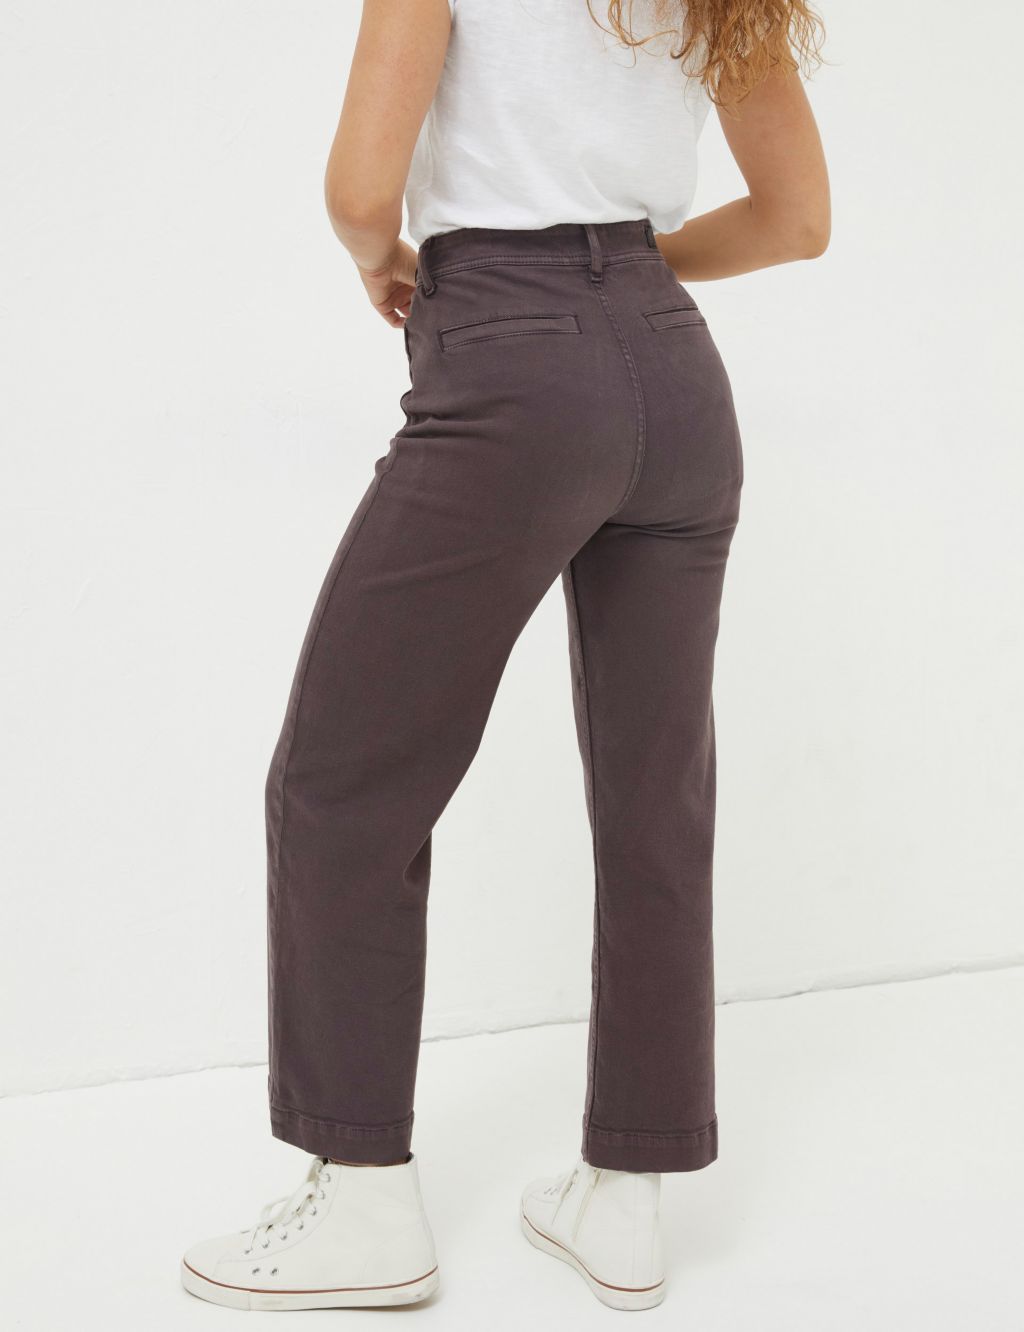 Wide Leg Cropped Jeans image 4